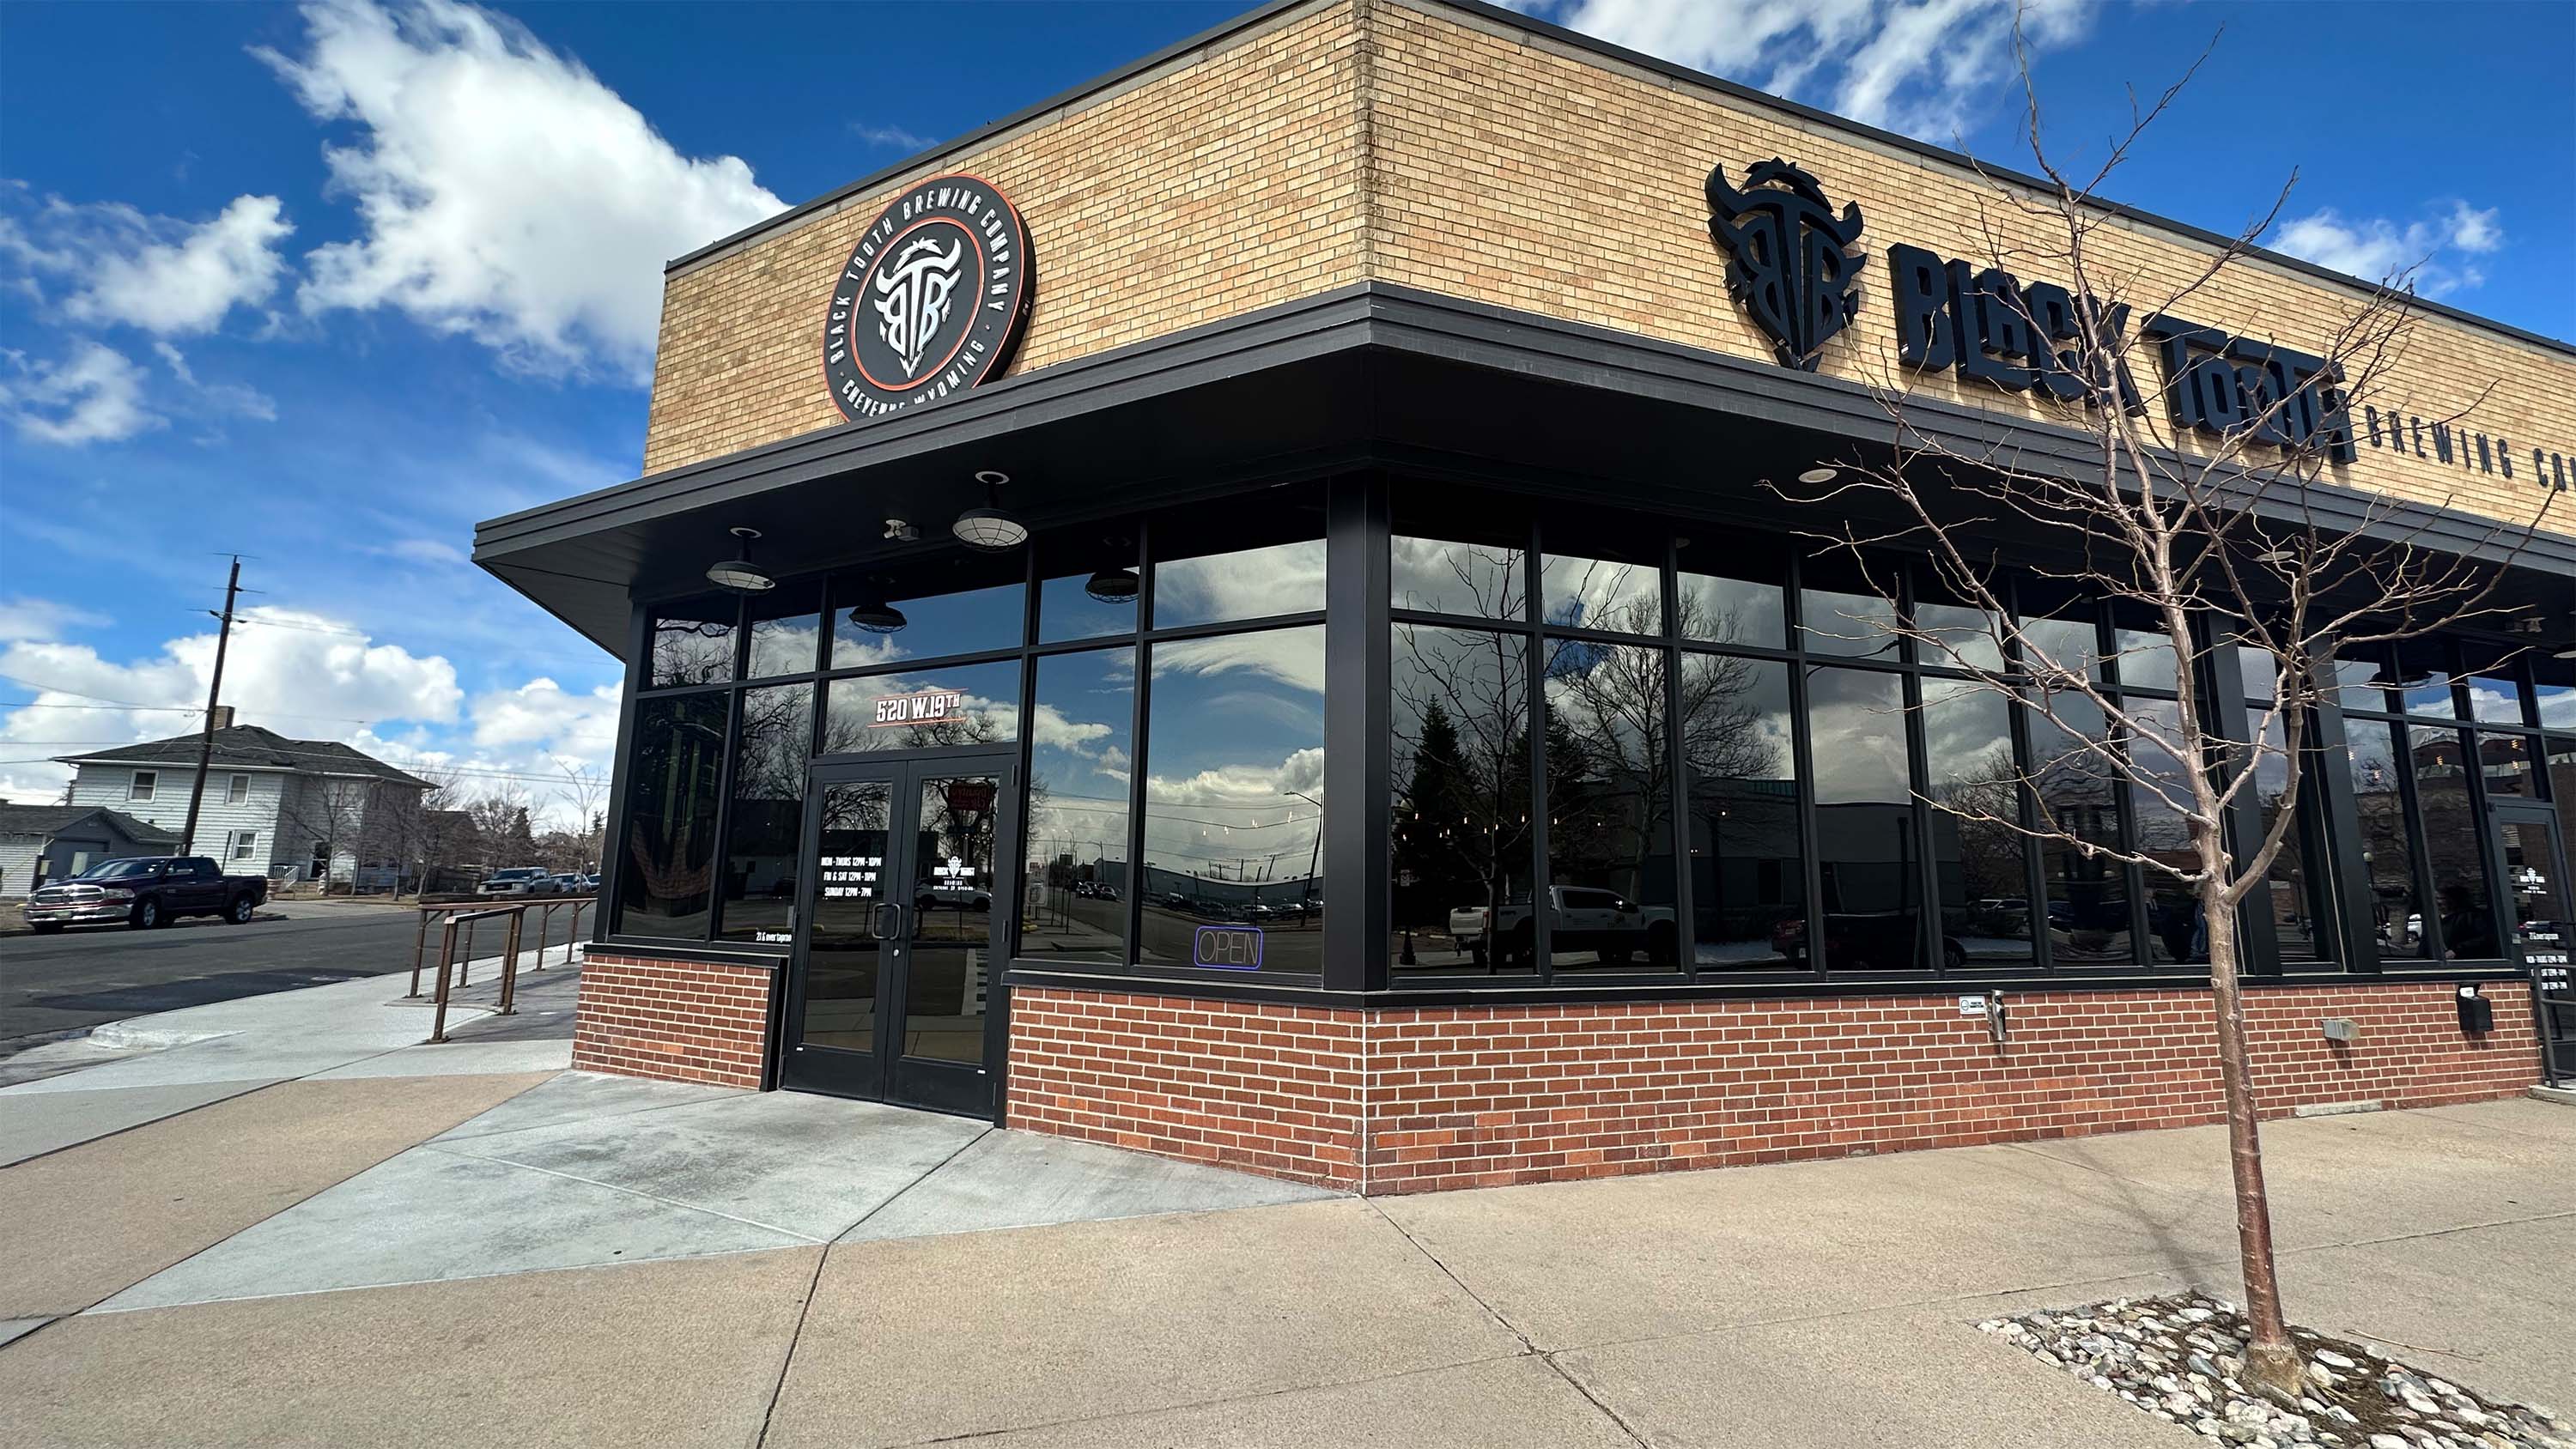 Black Tooth Brewing Company’s Cheyenne taproom is the largest of the brewery’s three locations, with brewing space to accommodate a 10 barrel pilot system.Photo Credit: Amber Leberman 